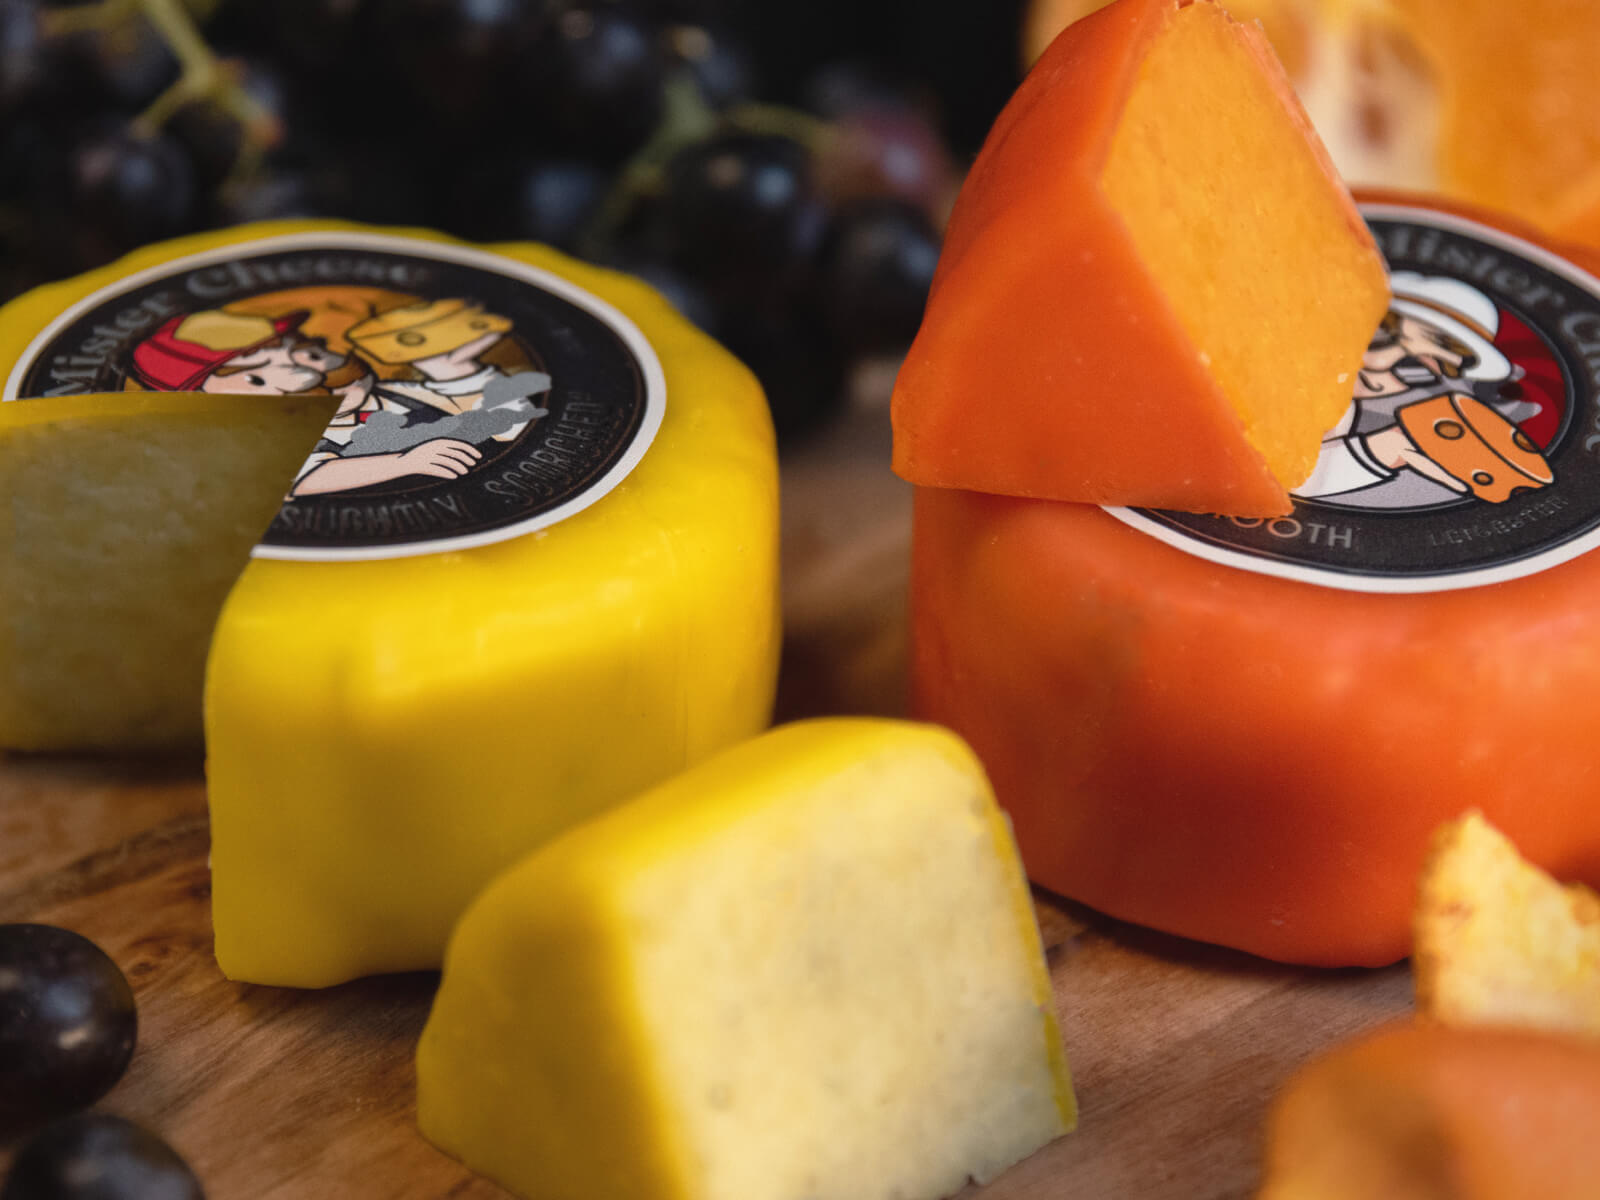 Branding for Cheese truckles